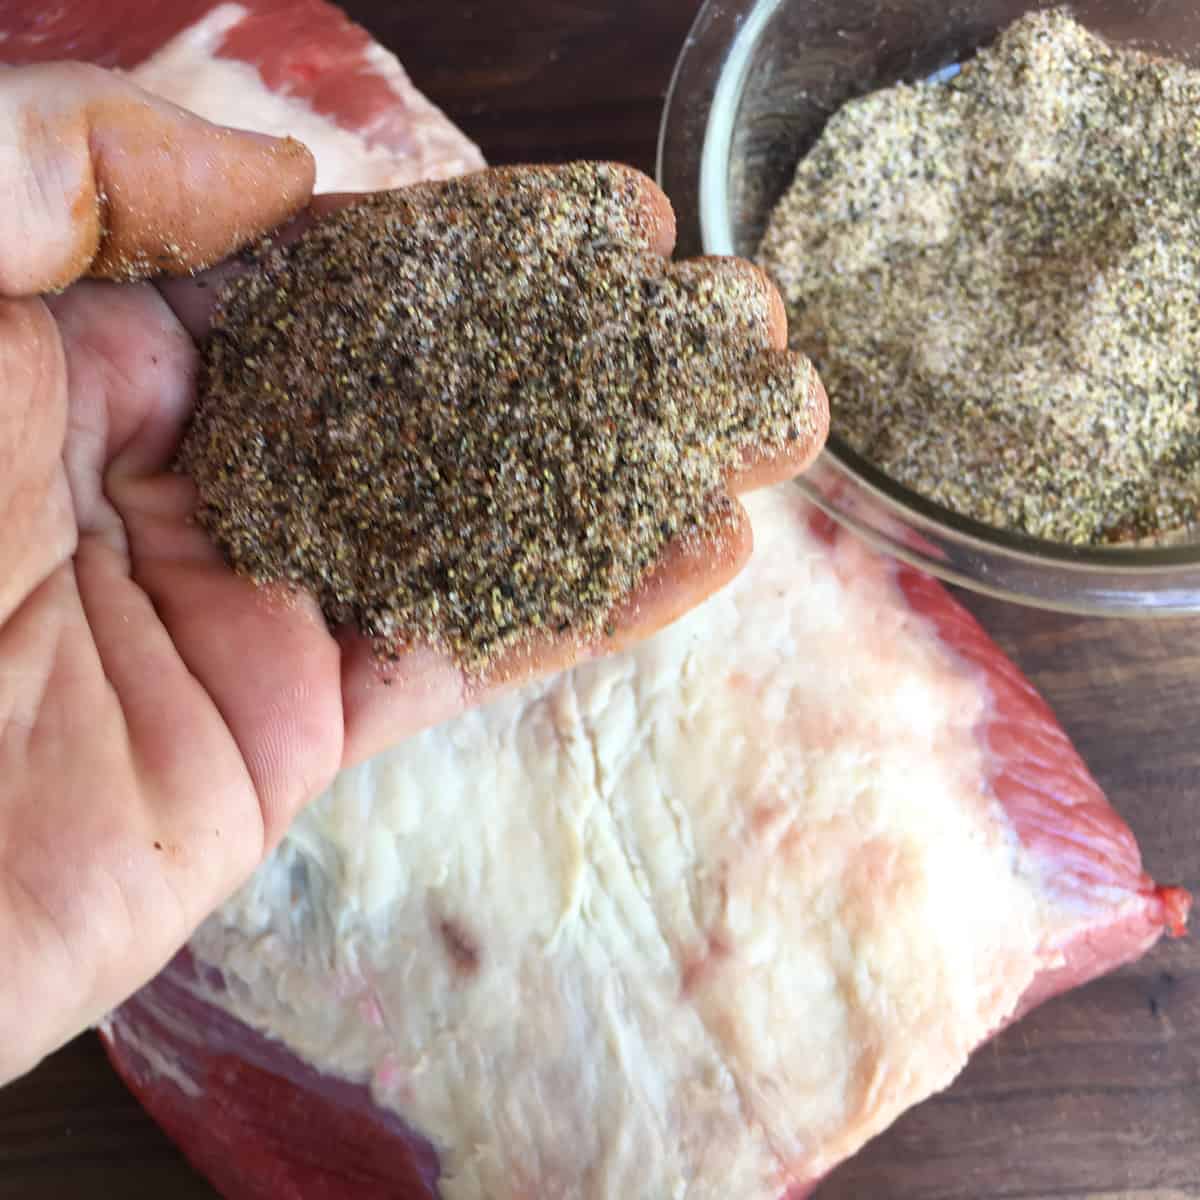 Holding a blend of spices over a roast.